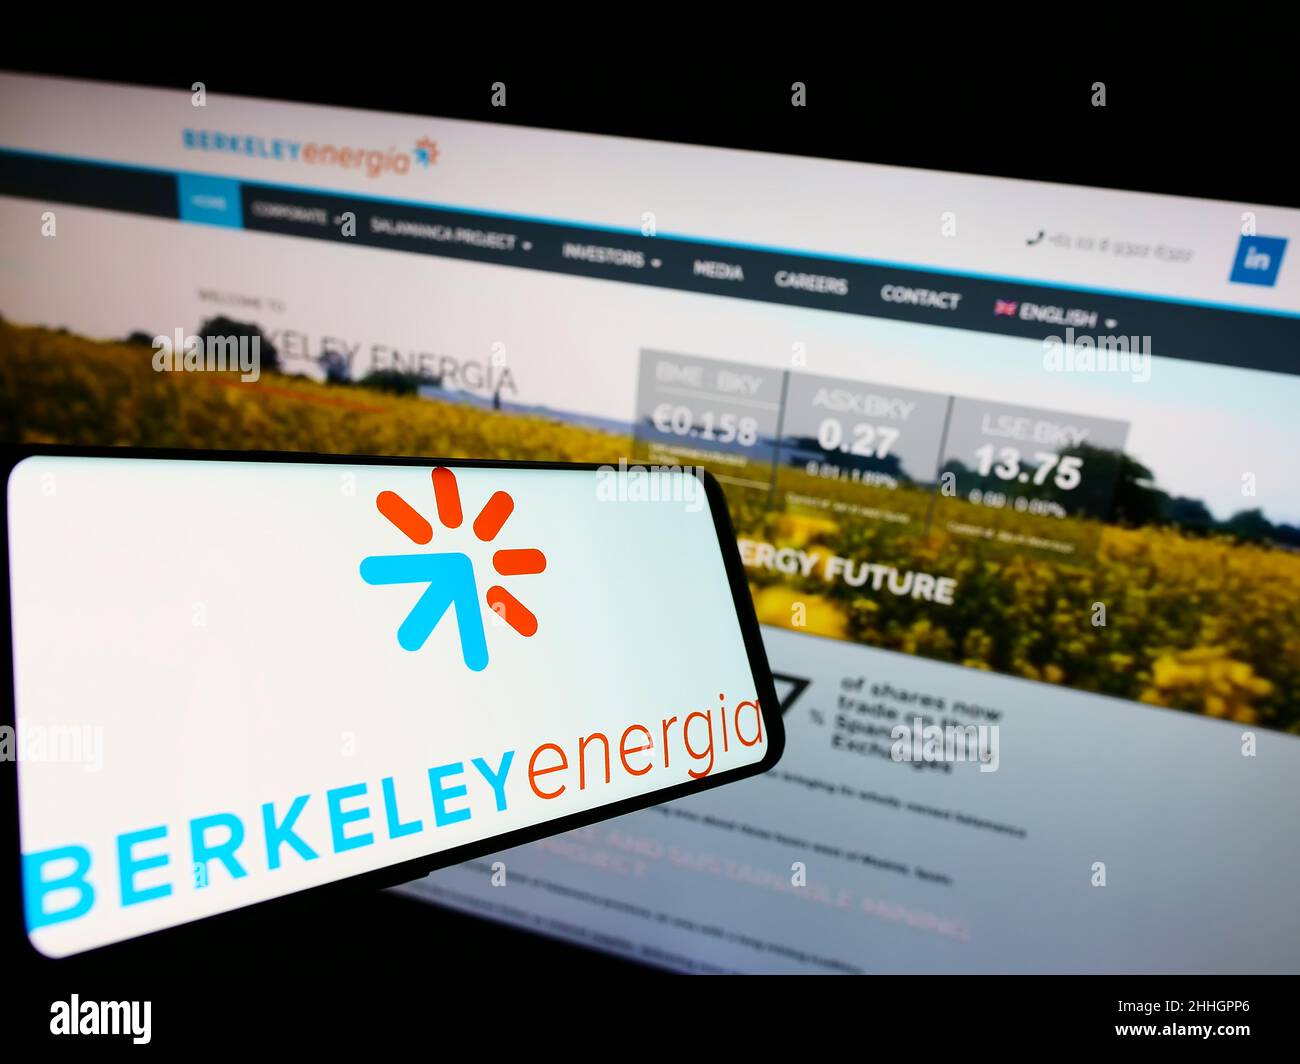 Mobile phone with logo of British energy company Berkeley Energia Limited on screen in front of website. Focus on center-right of phone display. Stock Photo